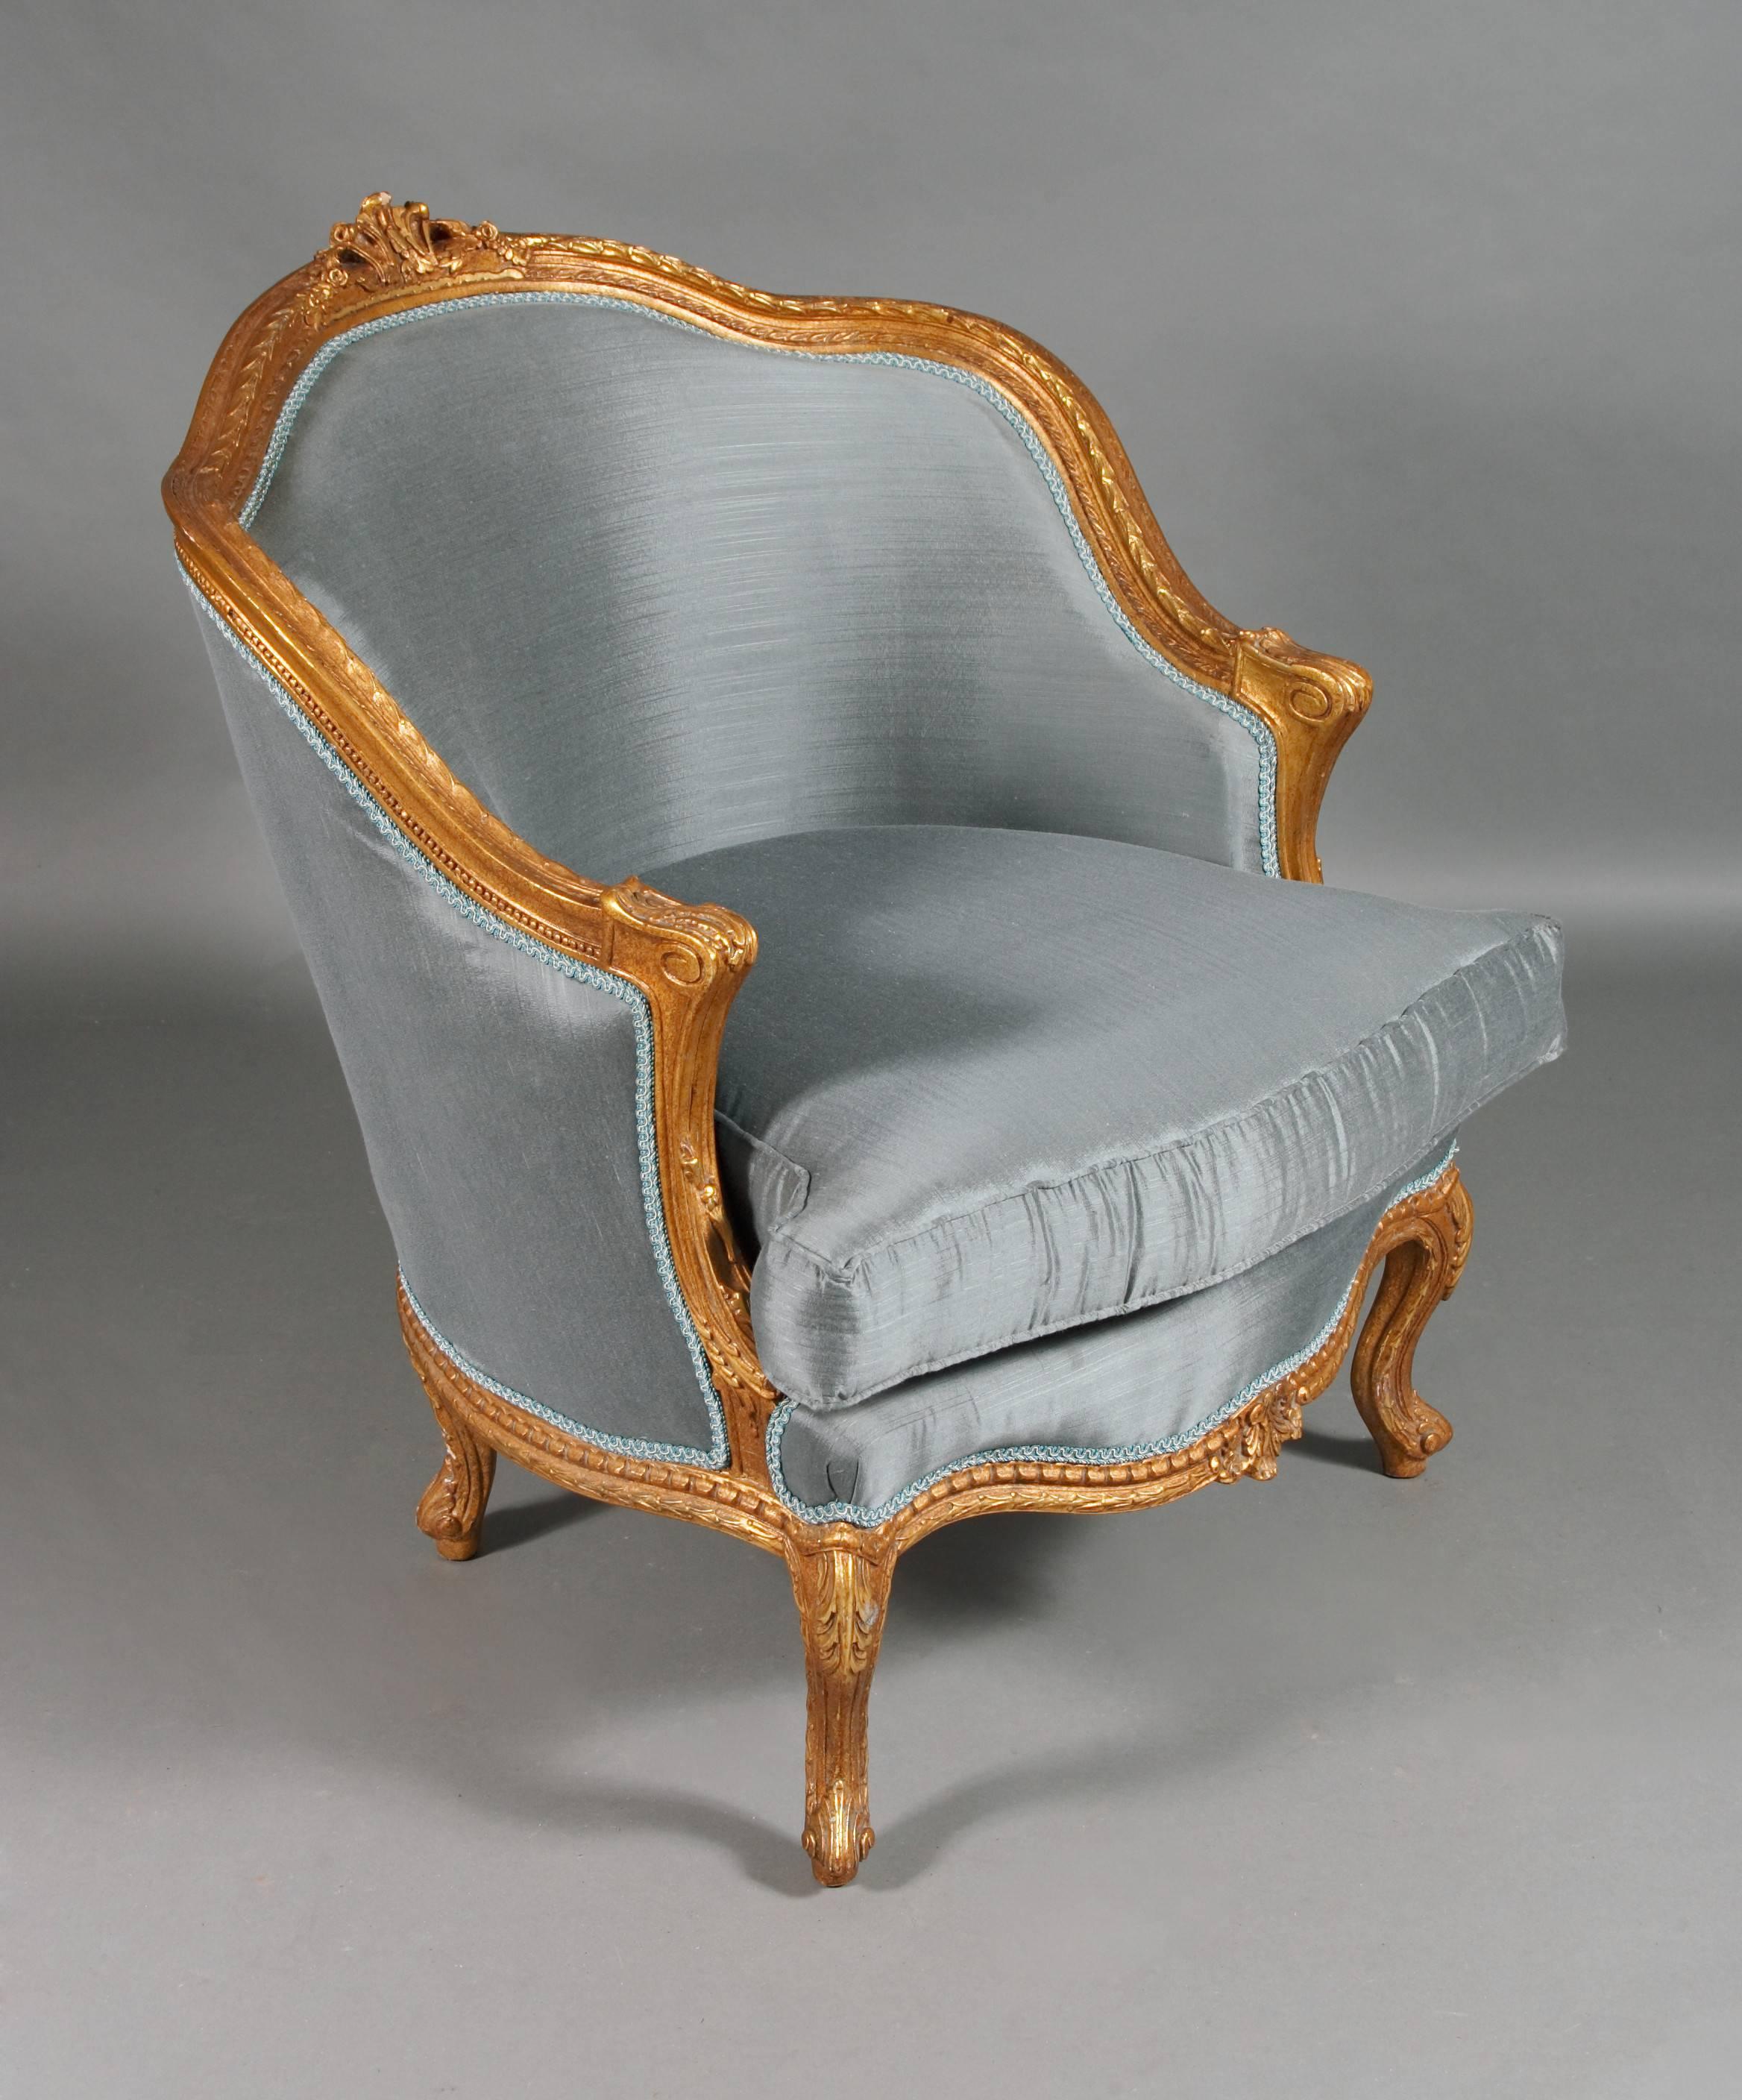 Solid beechwood, carved, colored and gilded. Semi-circular ascending backrest frame with rocaille crowning. Passive, carved frame. Slightly bent frame on curly legs. The seat and backrest are finished with a Classic upholstery. The fabric cover is